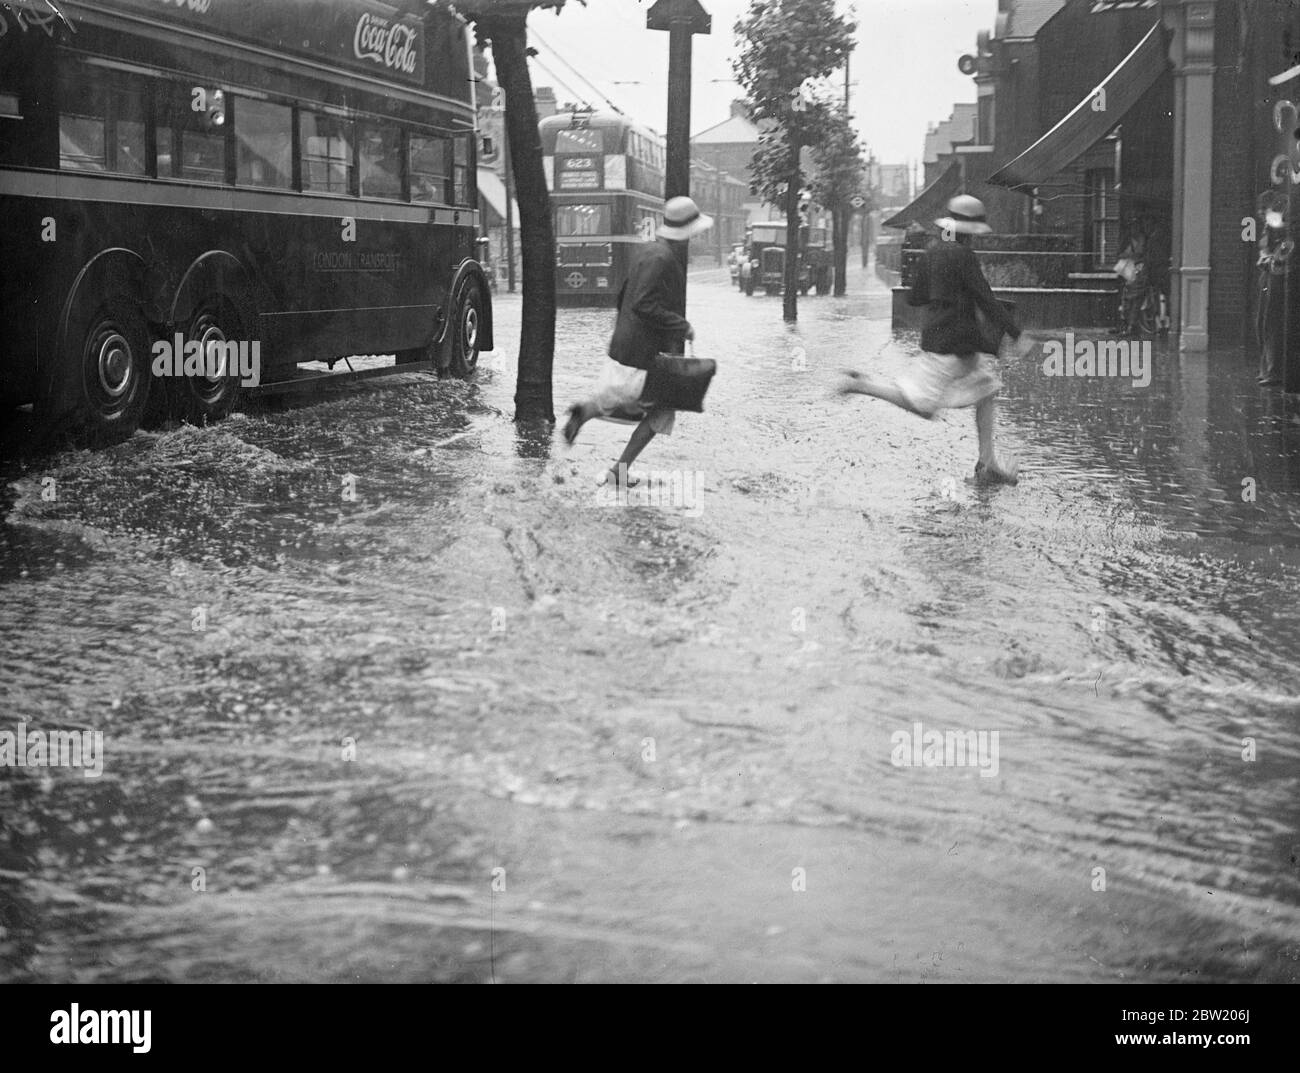 Schoolchildren running through the floods at the junction of Forest Road and Chingford Road Walthamstow. Torrential rains and flooded roads followed a terrific summer thunderstorm which created havoc in Walthamstow. The manholes in Walthamstow and Chingford district were forced up by the floods.. 15 July 1937. Stock Photo